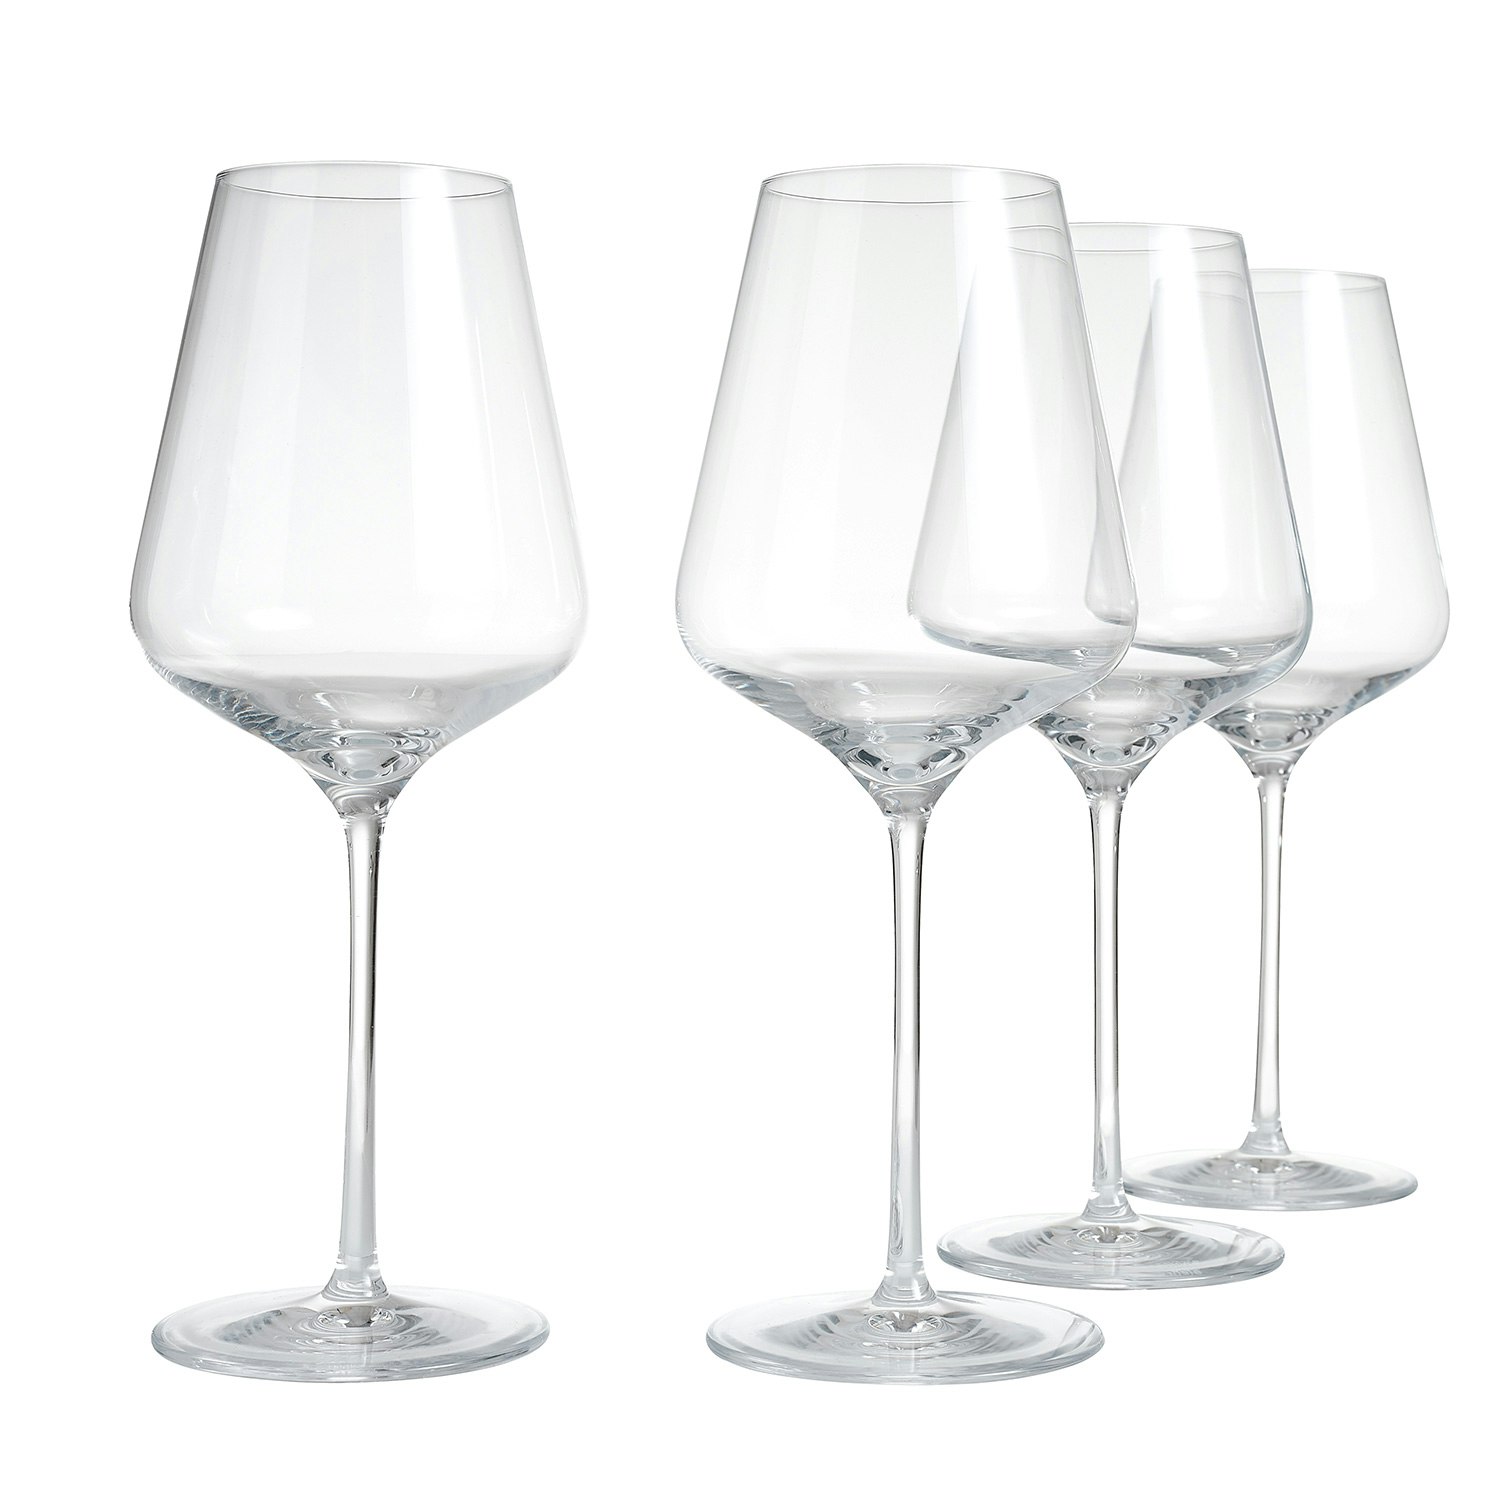 Connoisseur Extravagant red wine glass 71 cl 4-pack, Clear